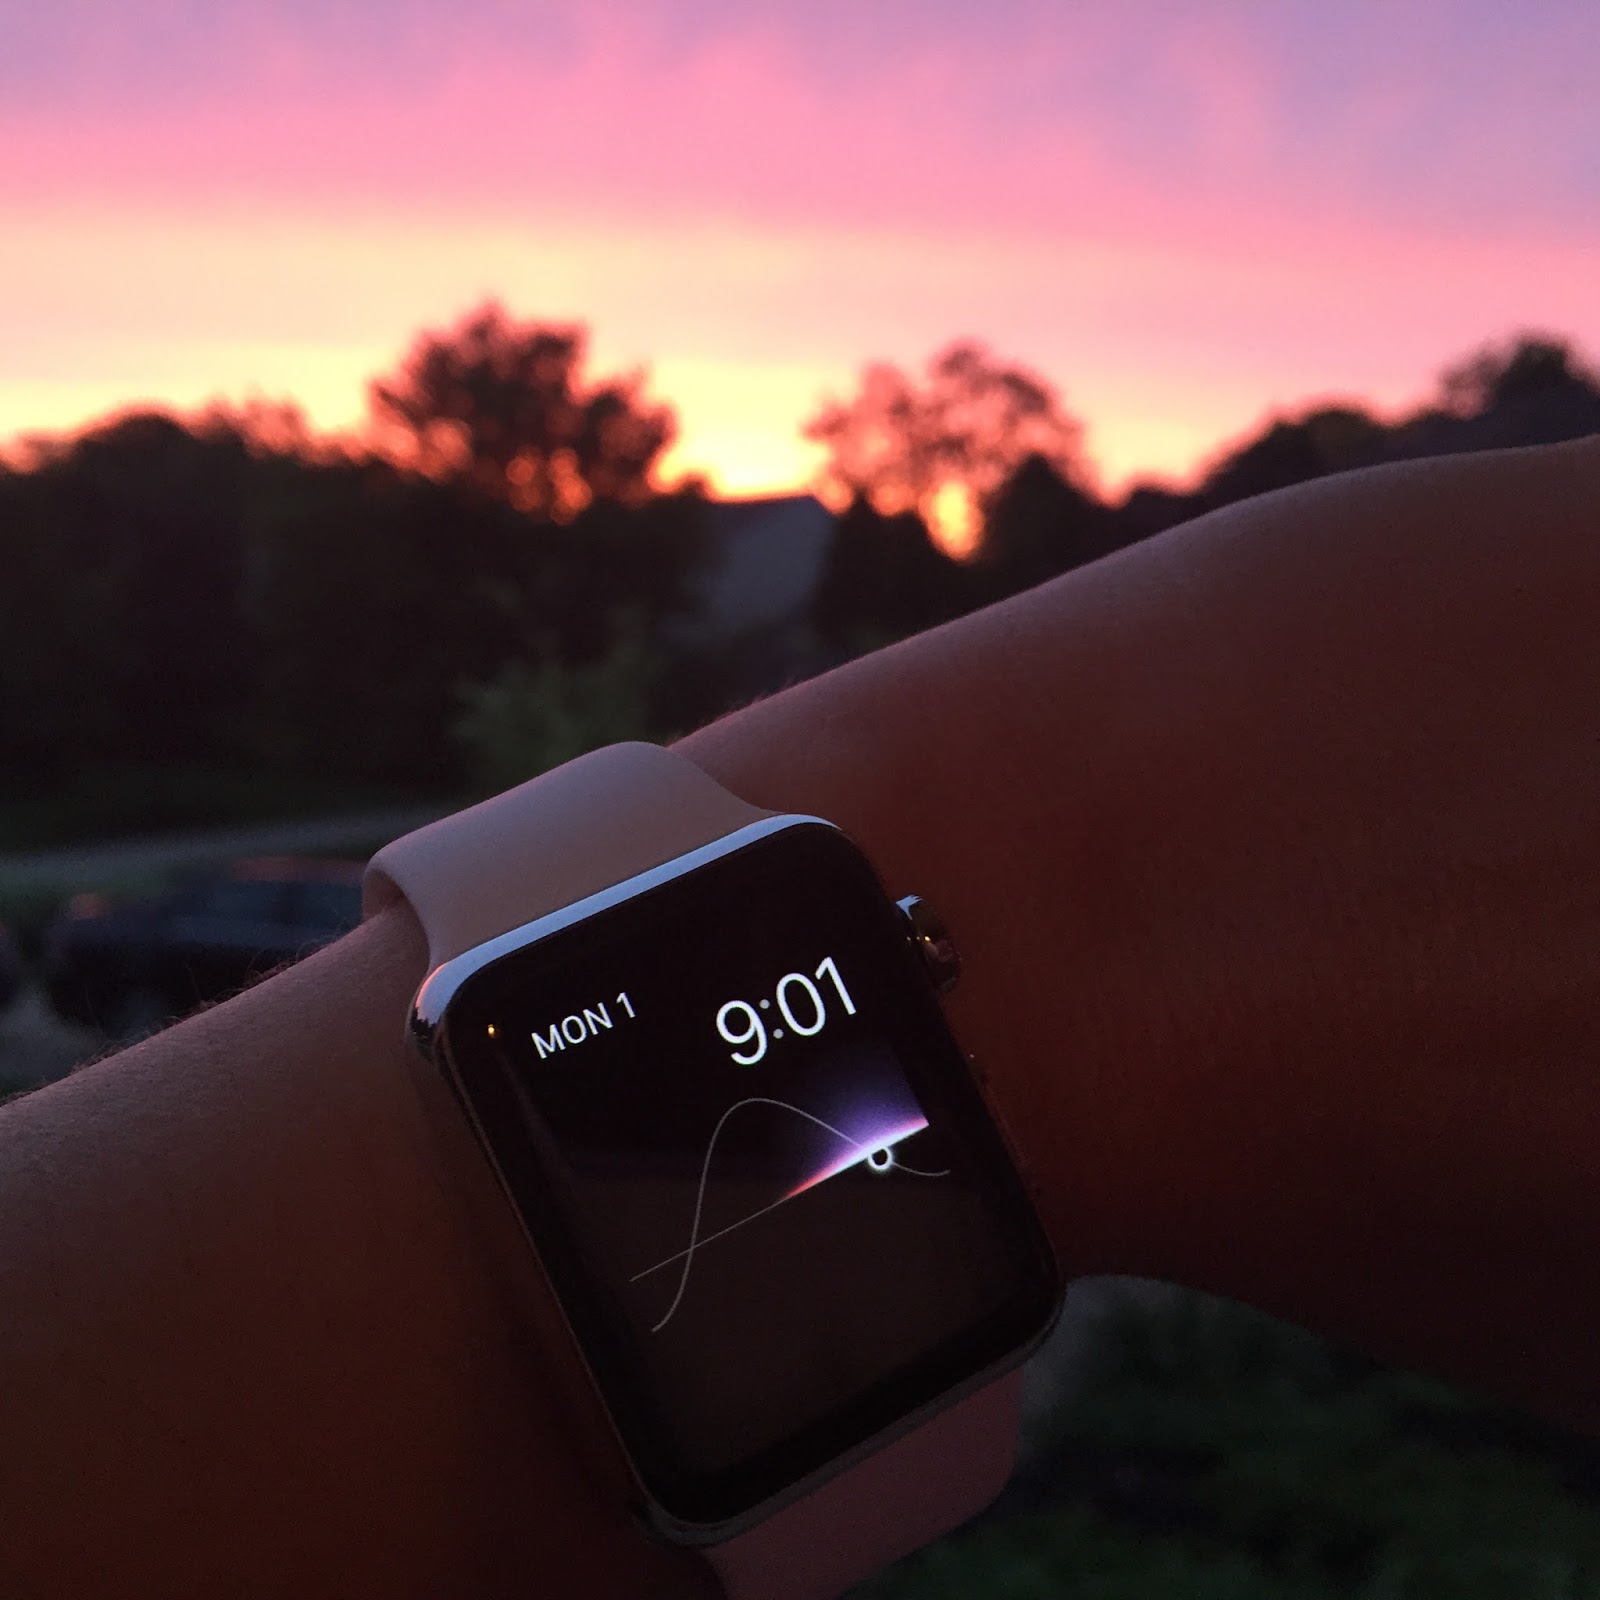 Closing Thoughts on the Apple Watch